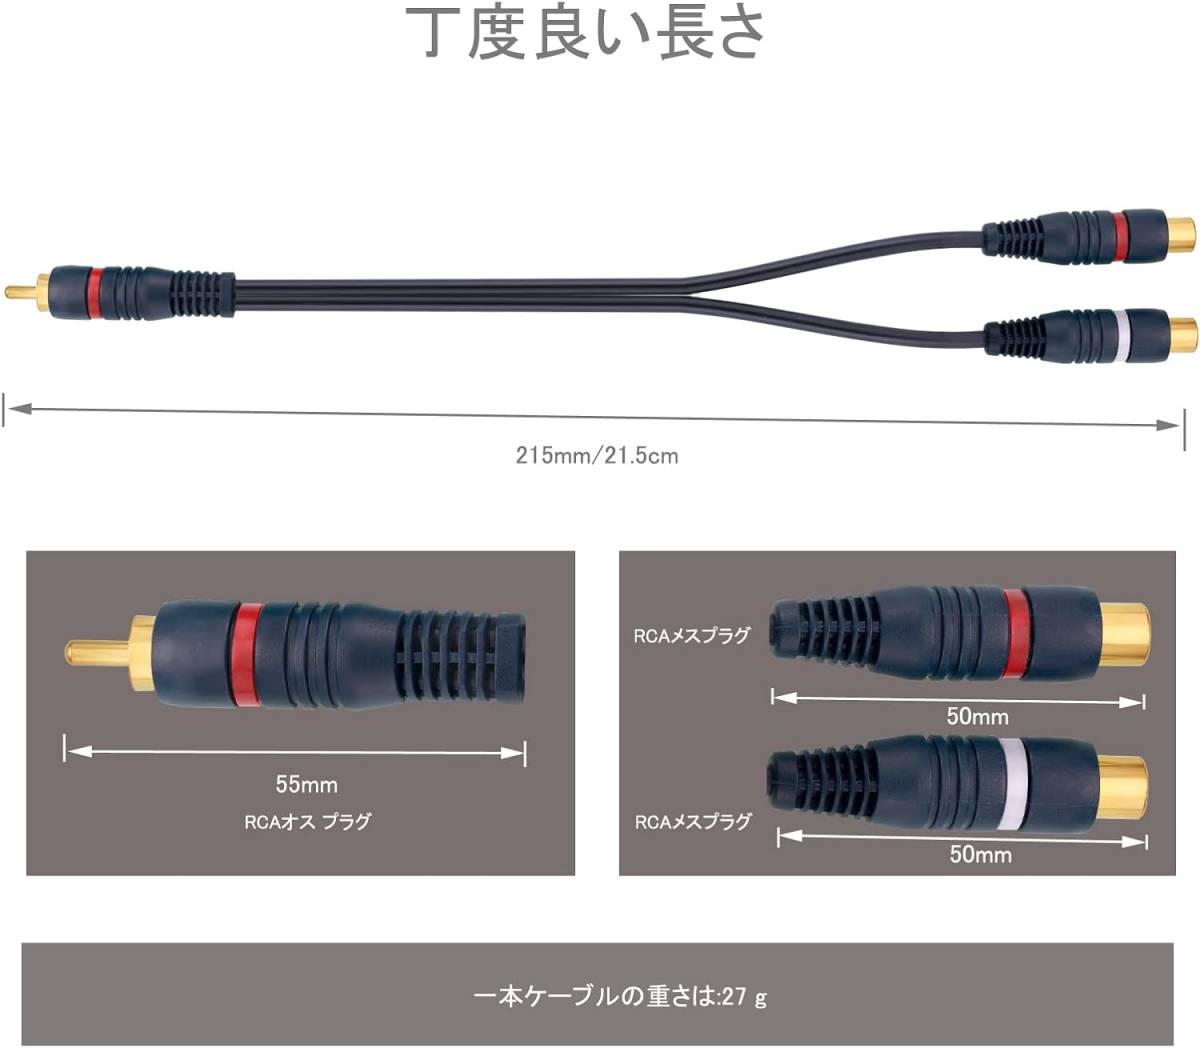 EIGHTNOO RCA sharing cable 2 ps 21.5cm divergence RCA male to 2RCA female RCA audio cable video o